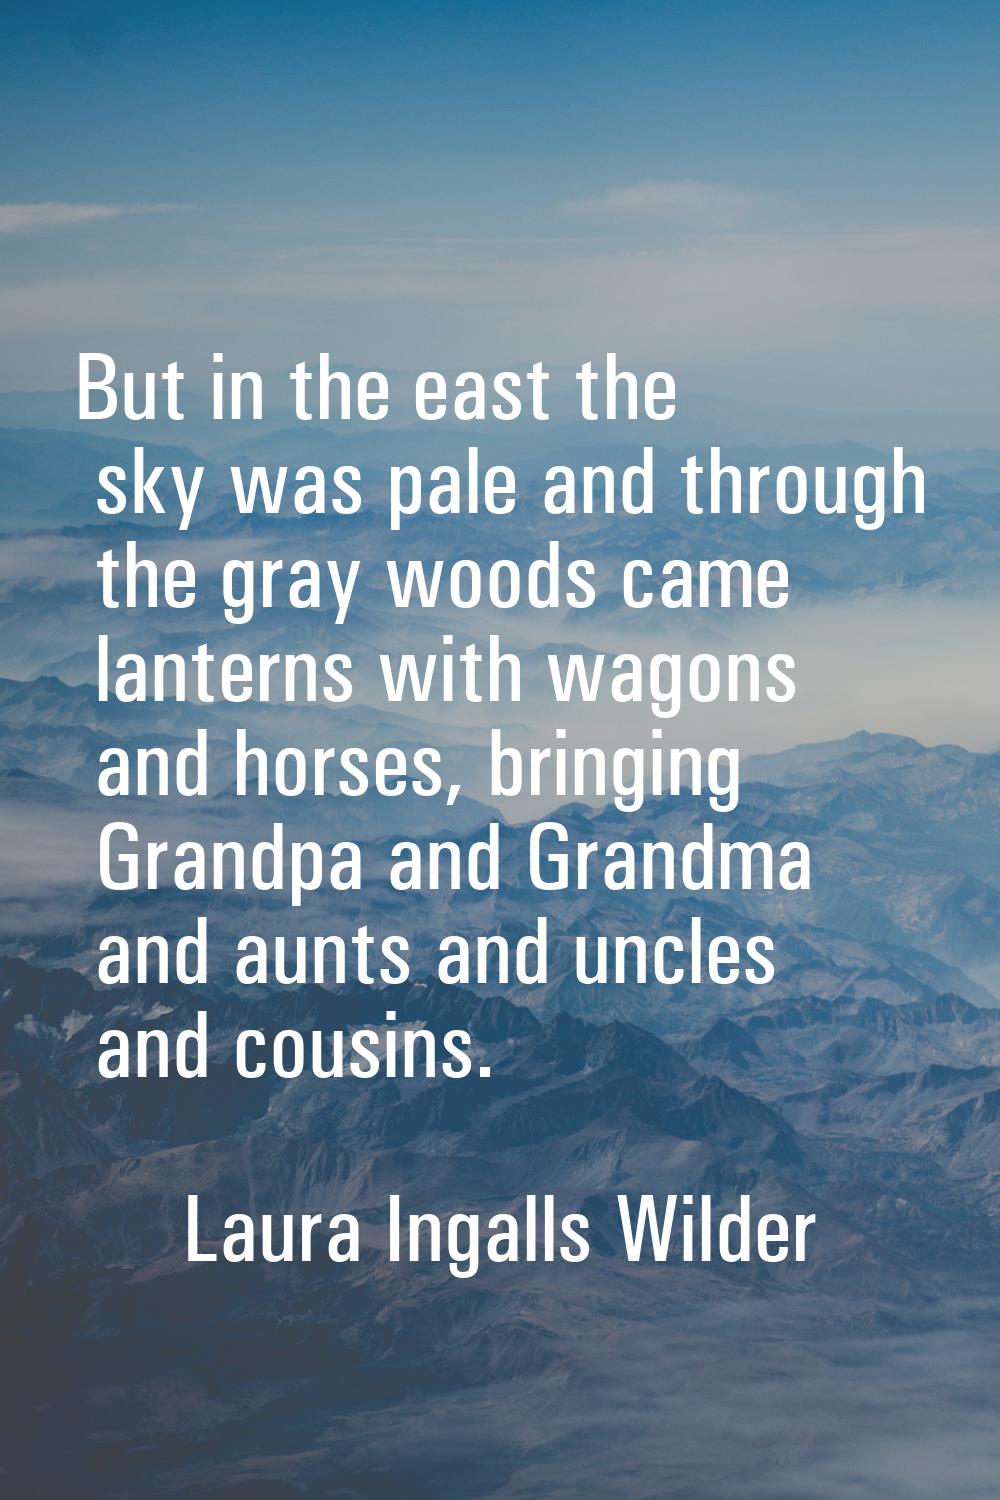 But in the east the sky was pale and through the gray woods came lanterns with wagons and horses, b